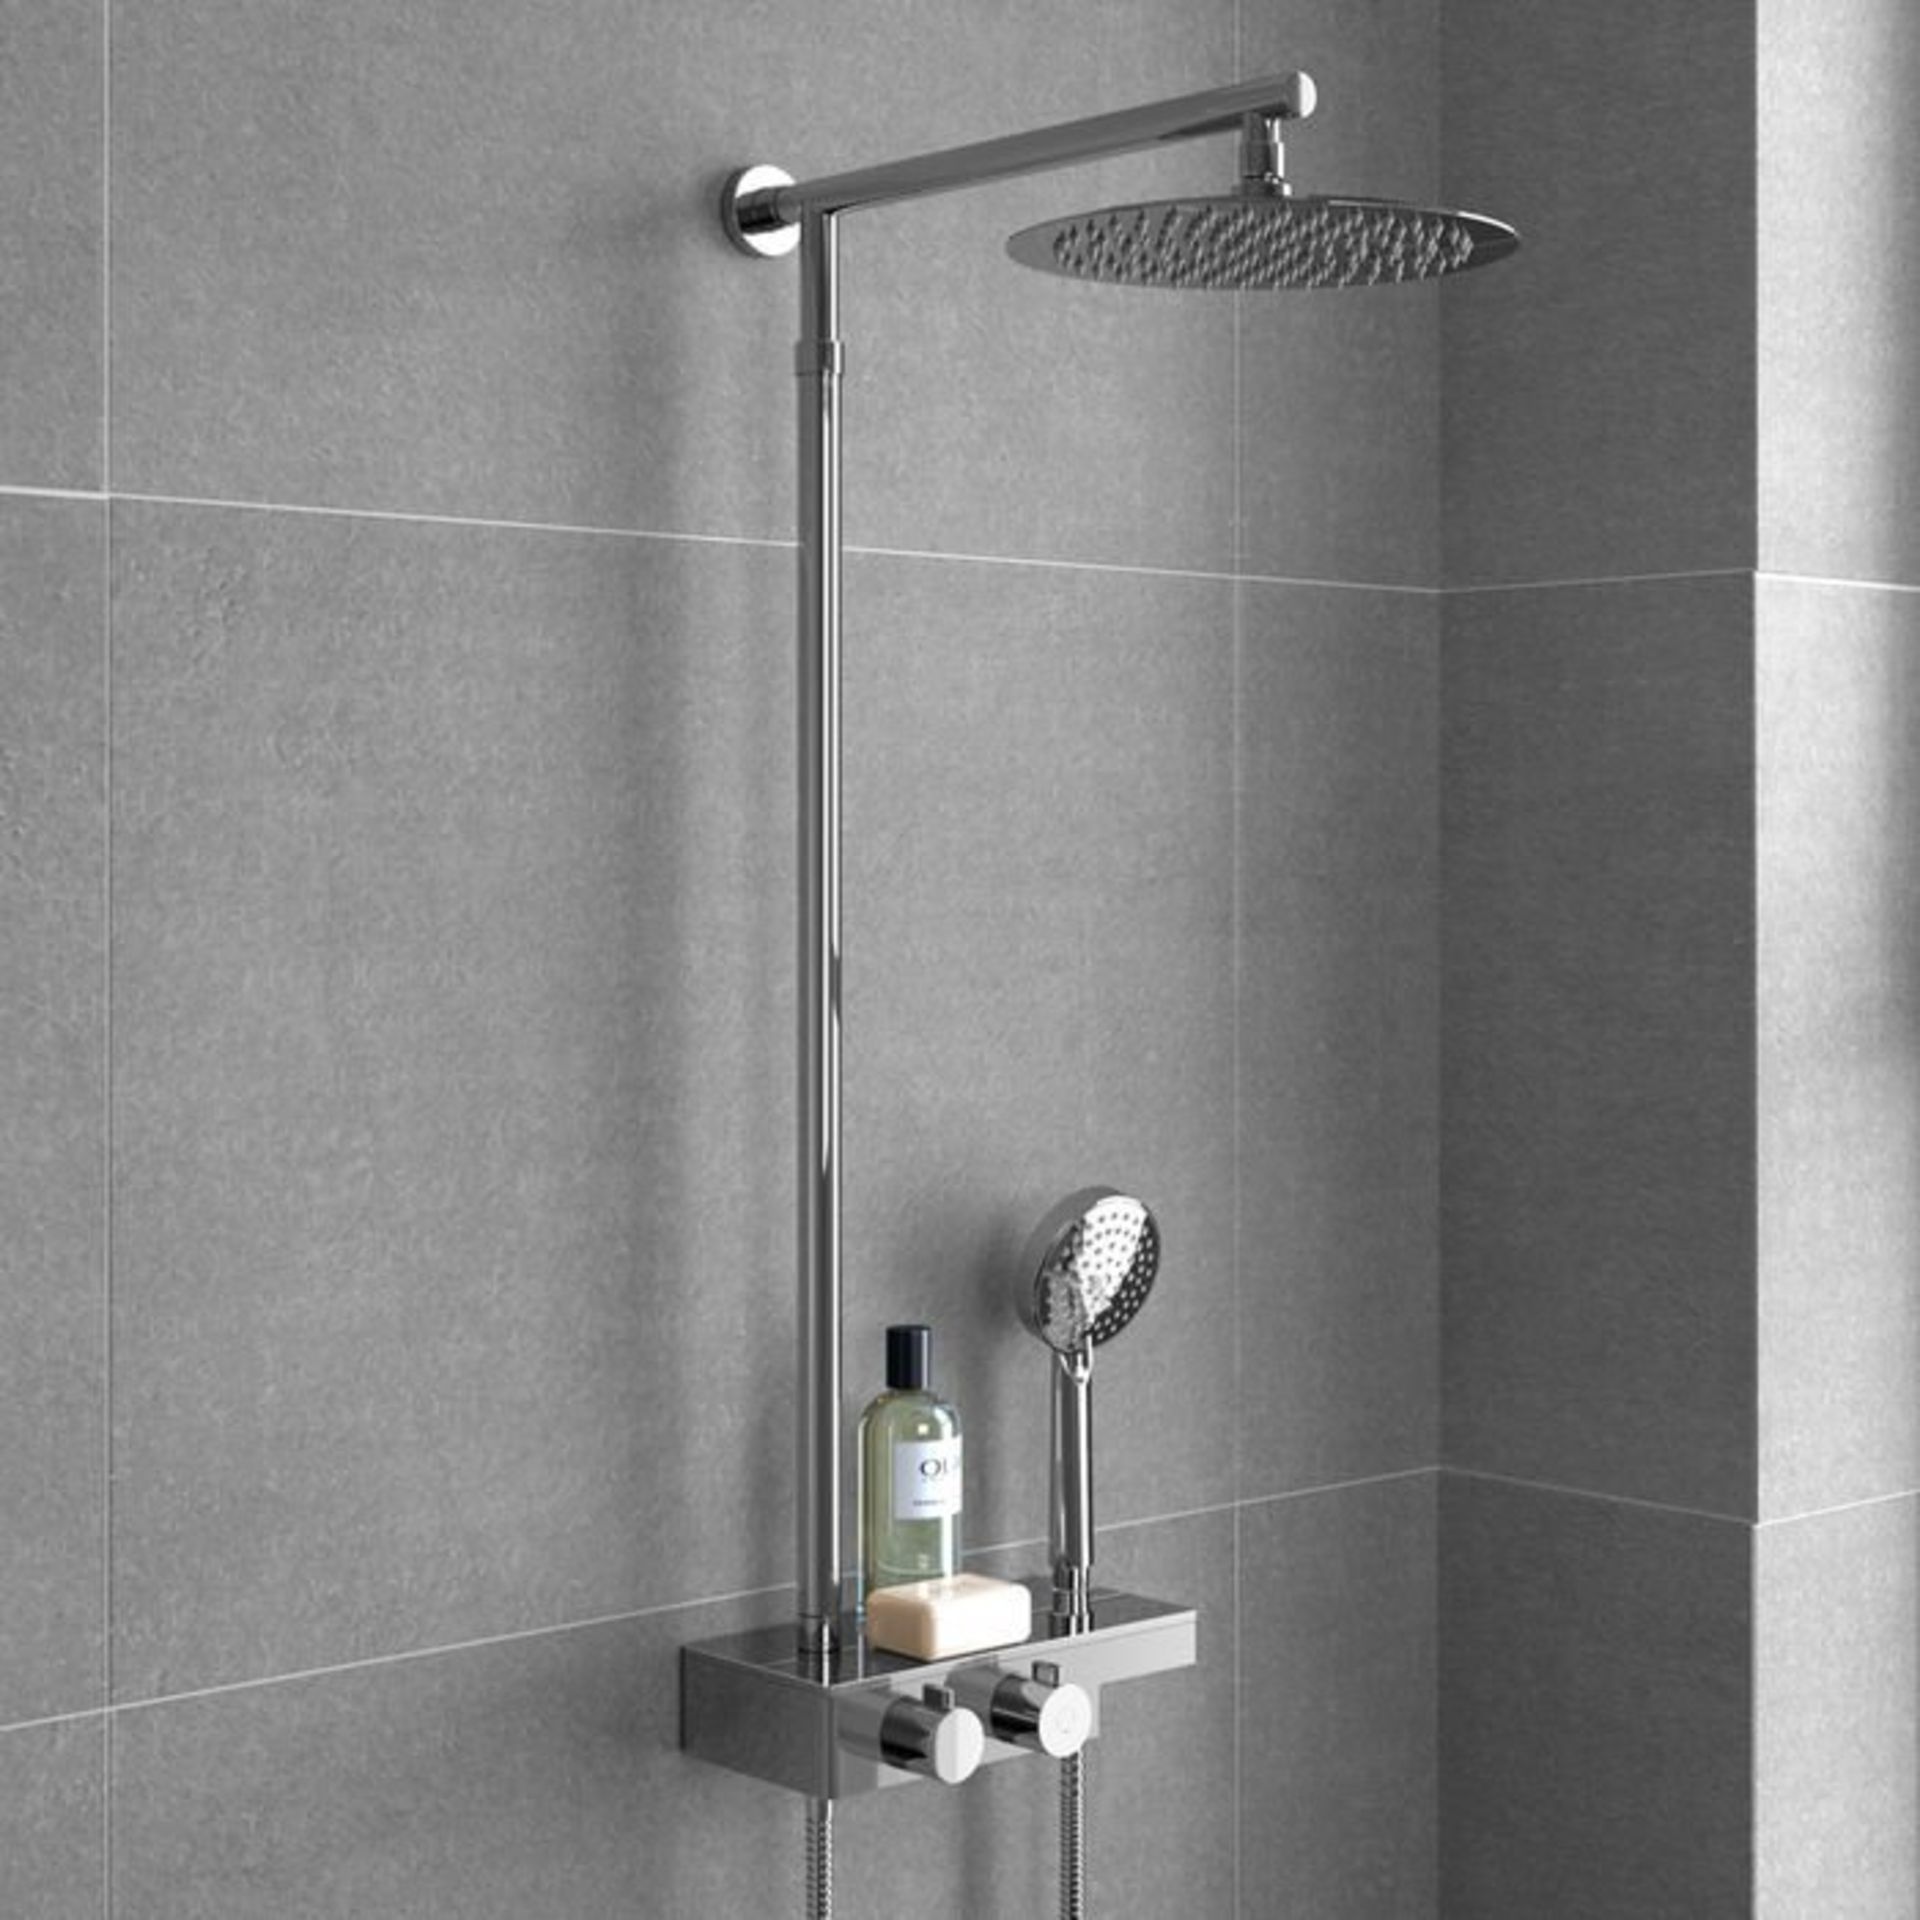 (H35) Round Exposed Thermostatic Mixer Shower Kit & Large Head. Cool to touch shower for - Image 2 of 6